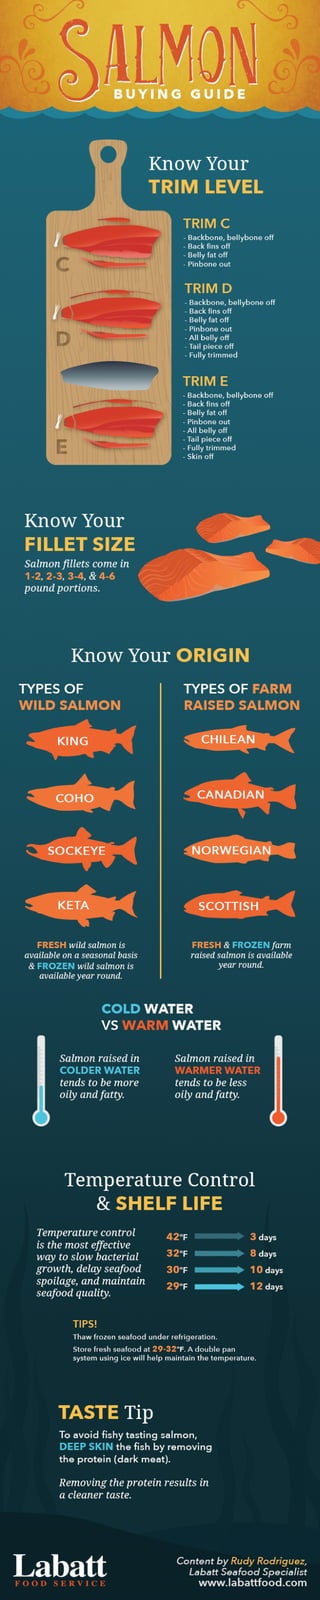 INFOGRAPHIC: How to Buy Salmon